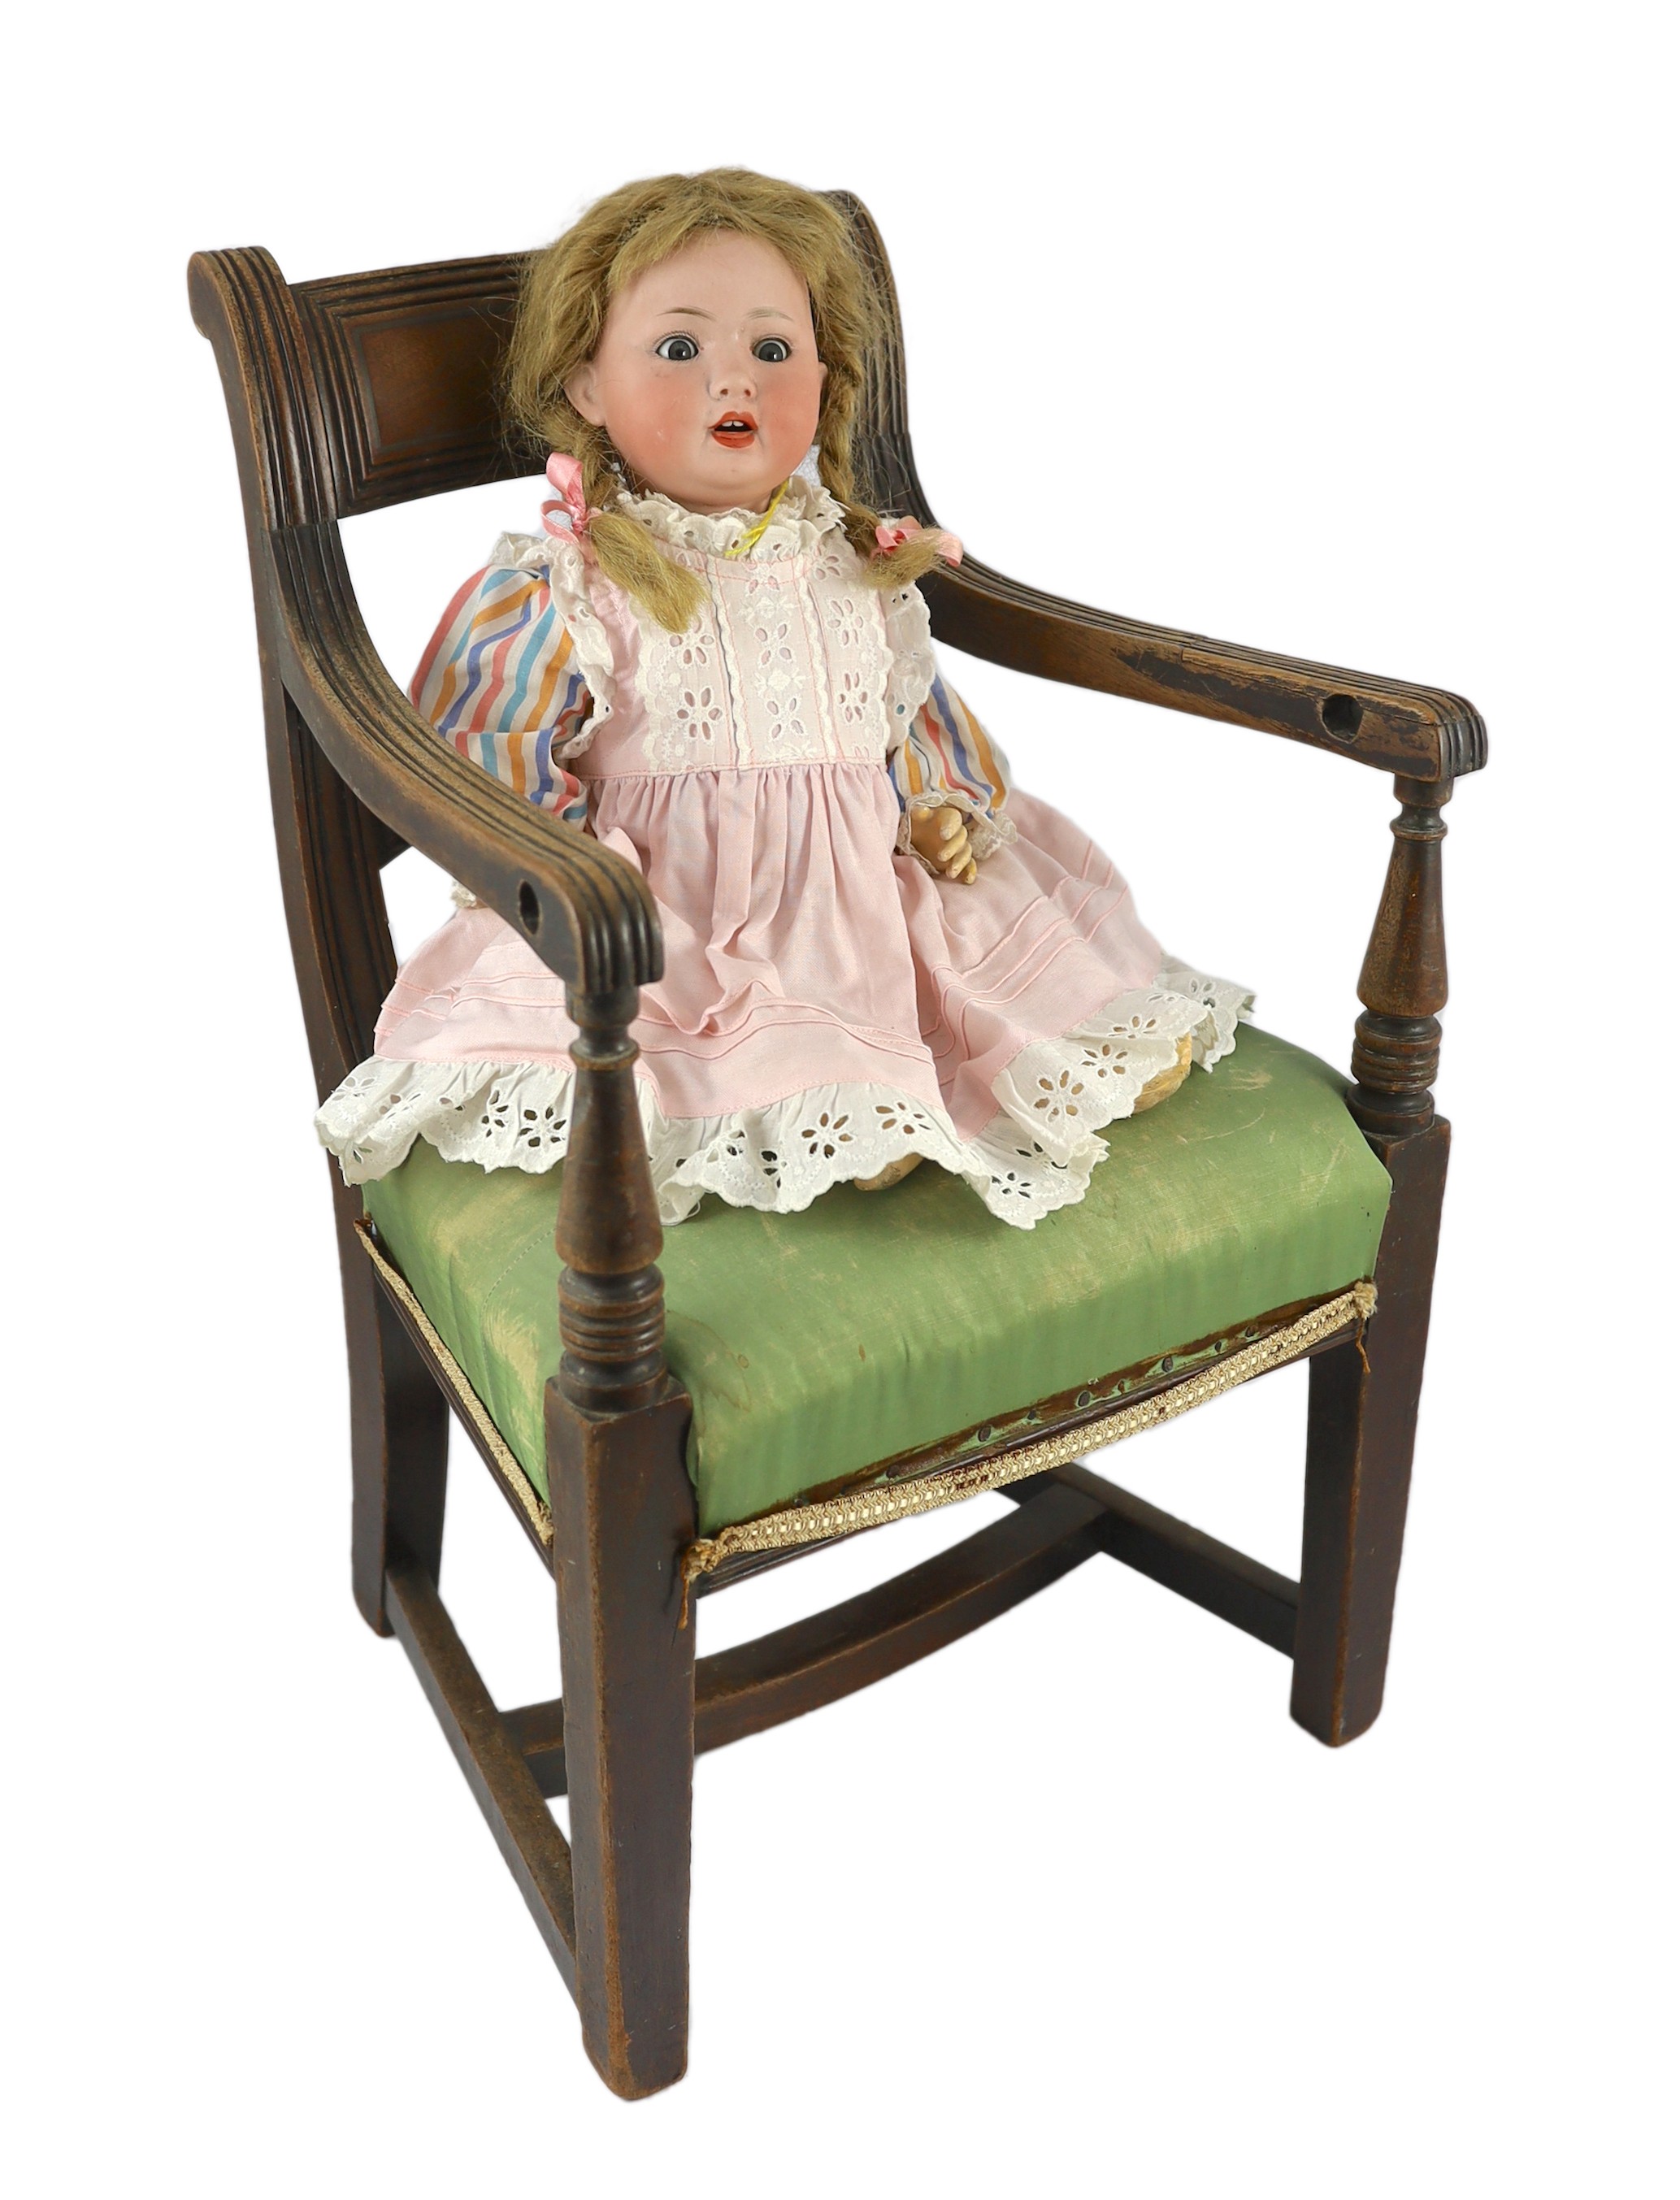 A Porzellanfabrik Mengersgereuth bisque doll, German, circa 1920, 17in. Please note the chair is for display purposes only.                                                                                                 